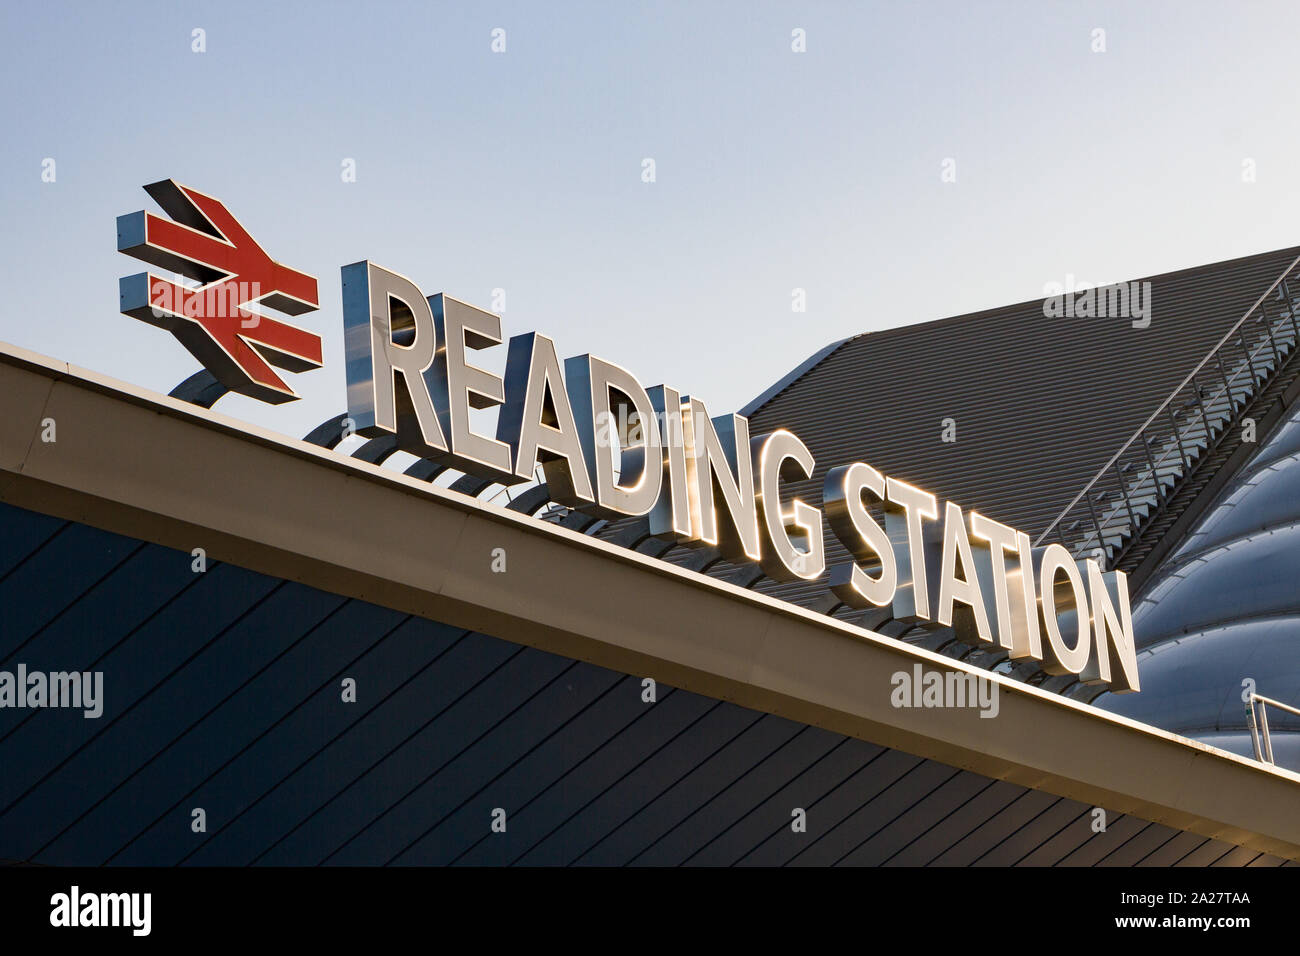 The British Rail sign outside Reading Station Stock Photo